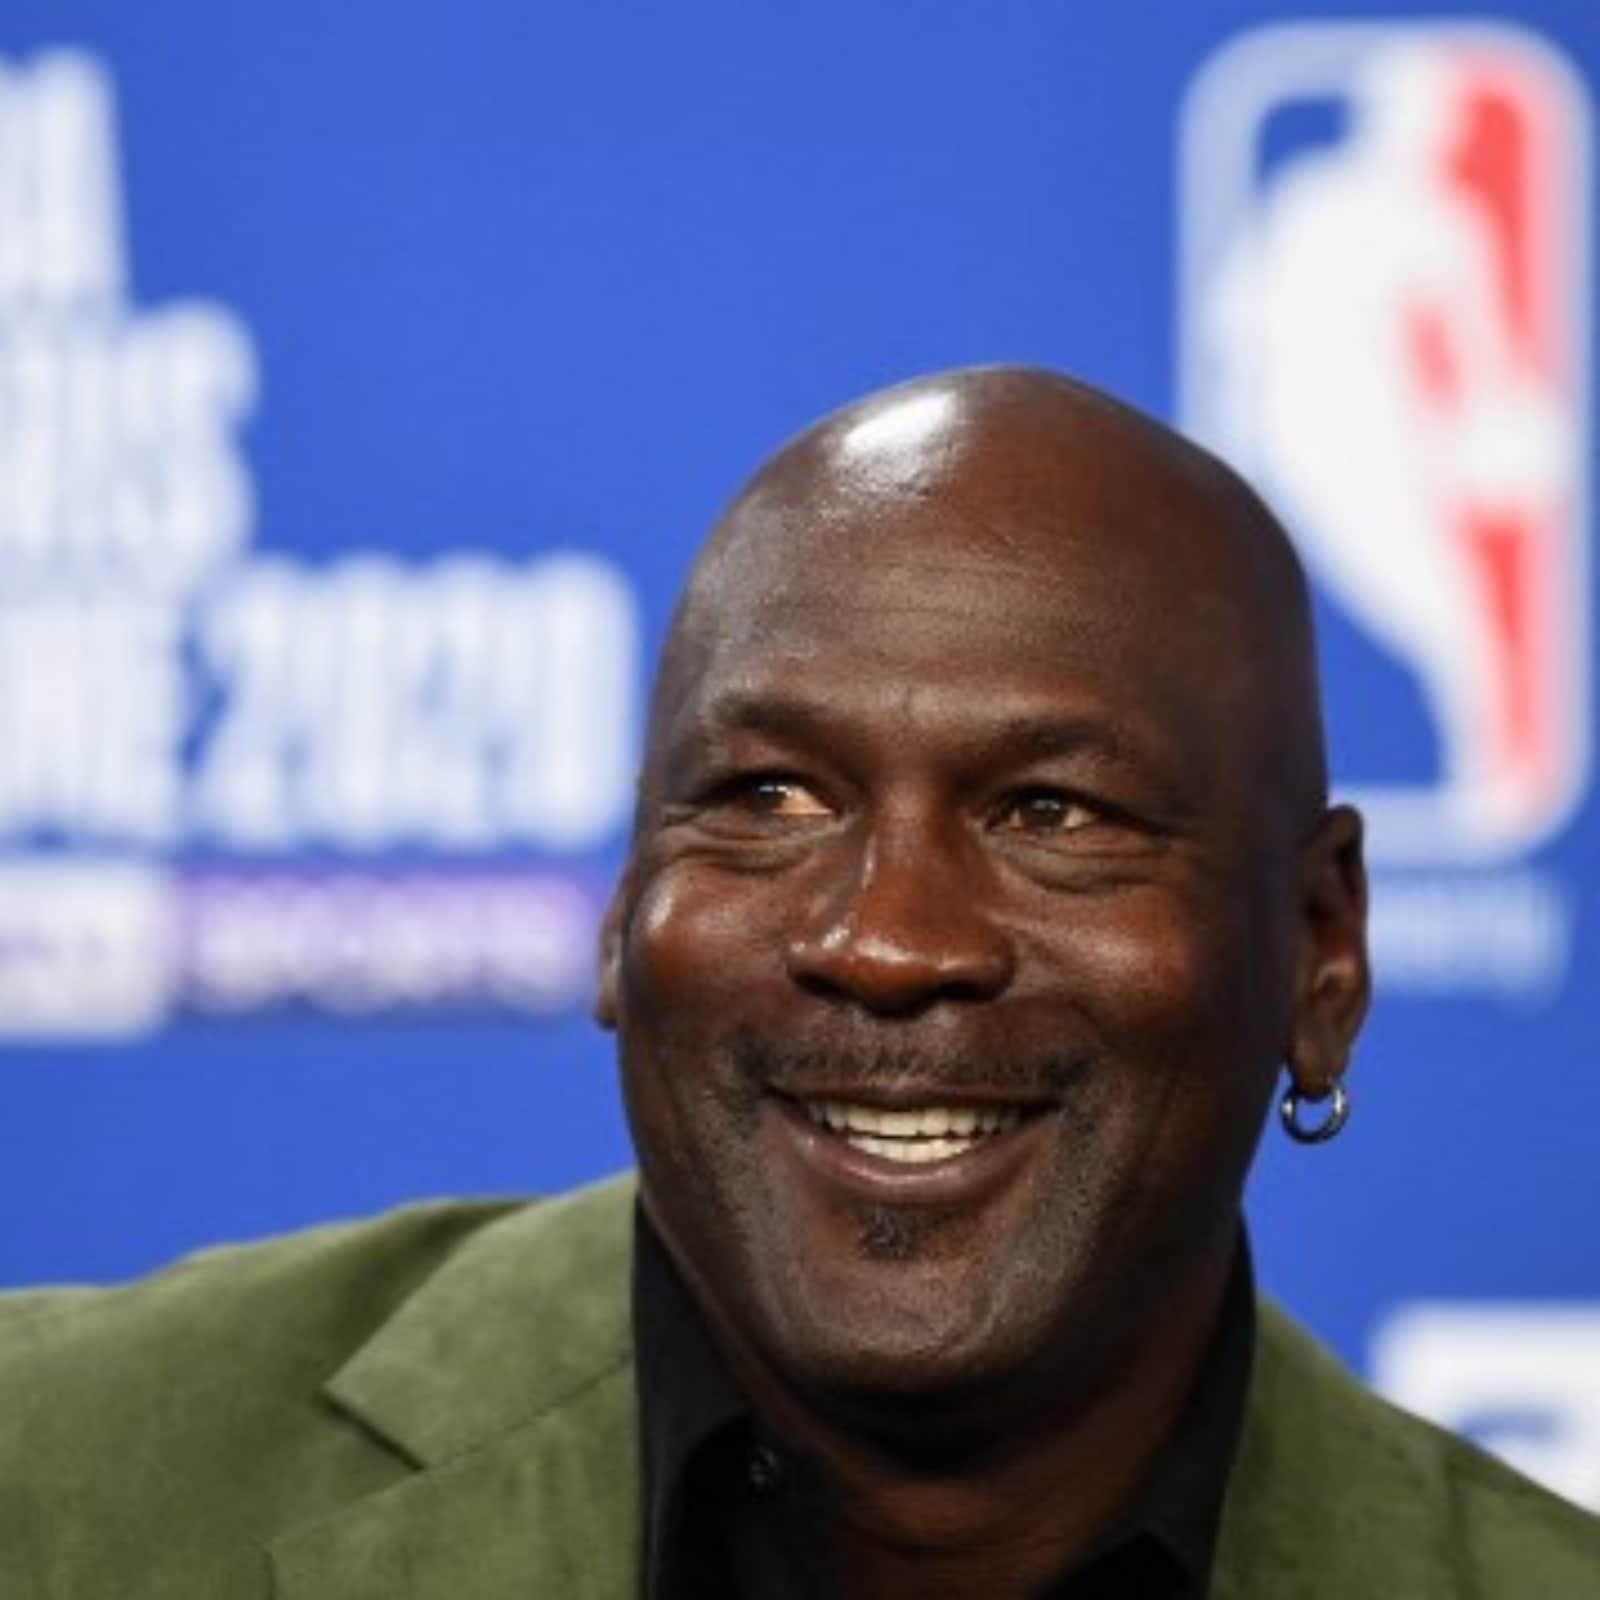 Michael Jordan's 1984 sneakers sell for nearly $1.5 million, an auction  record - CBS News